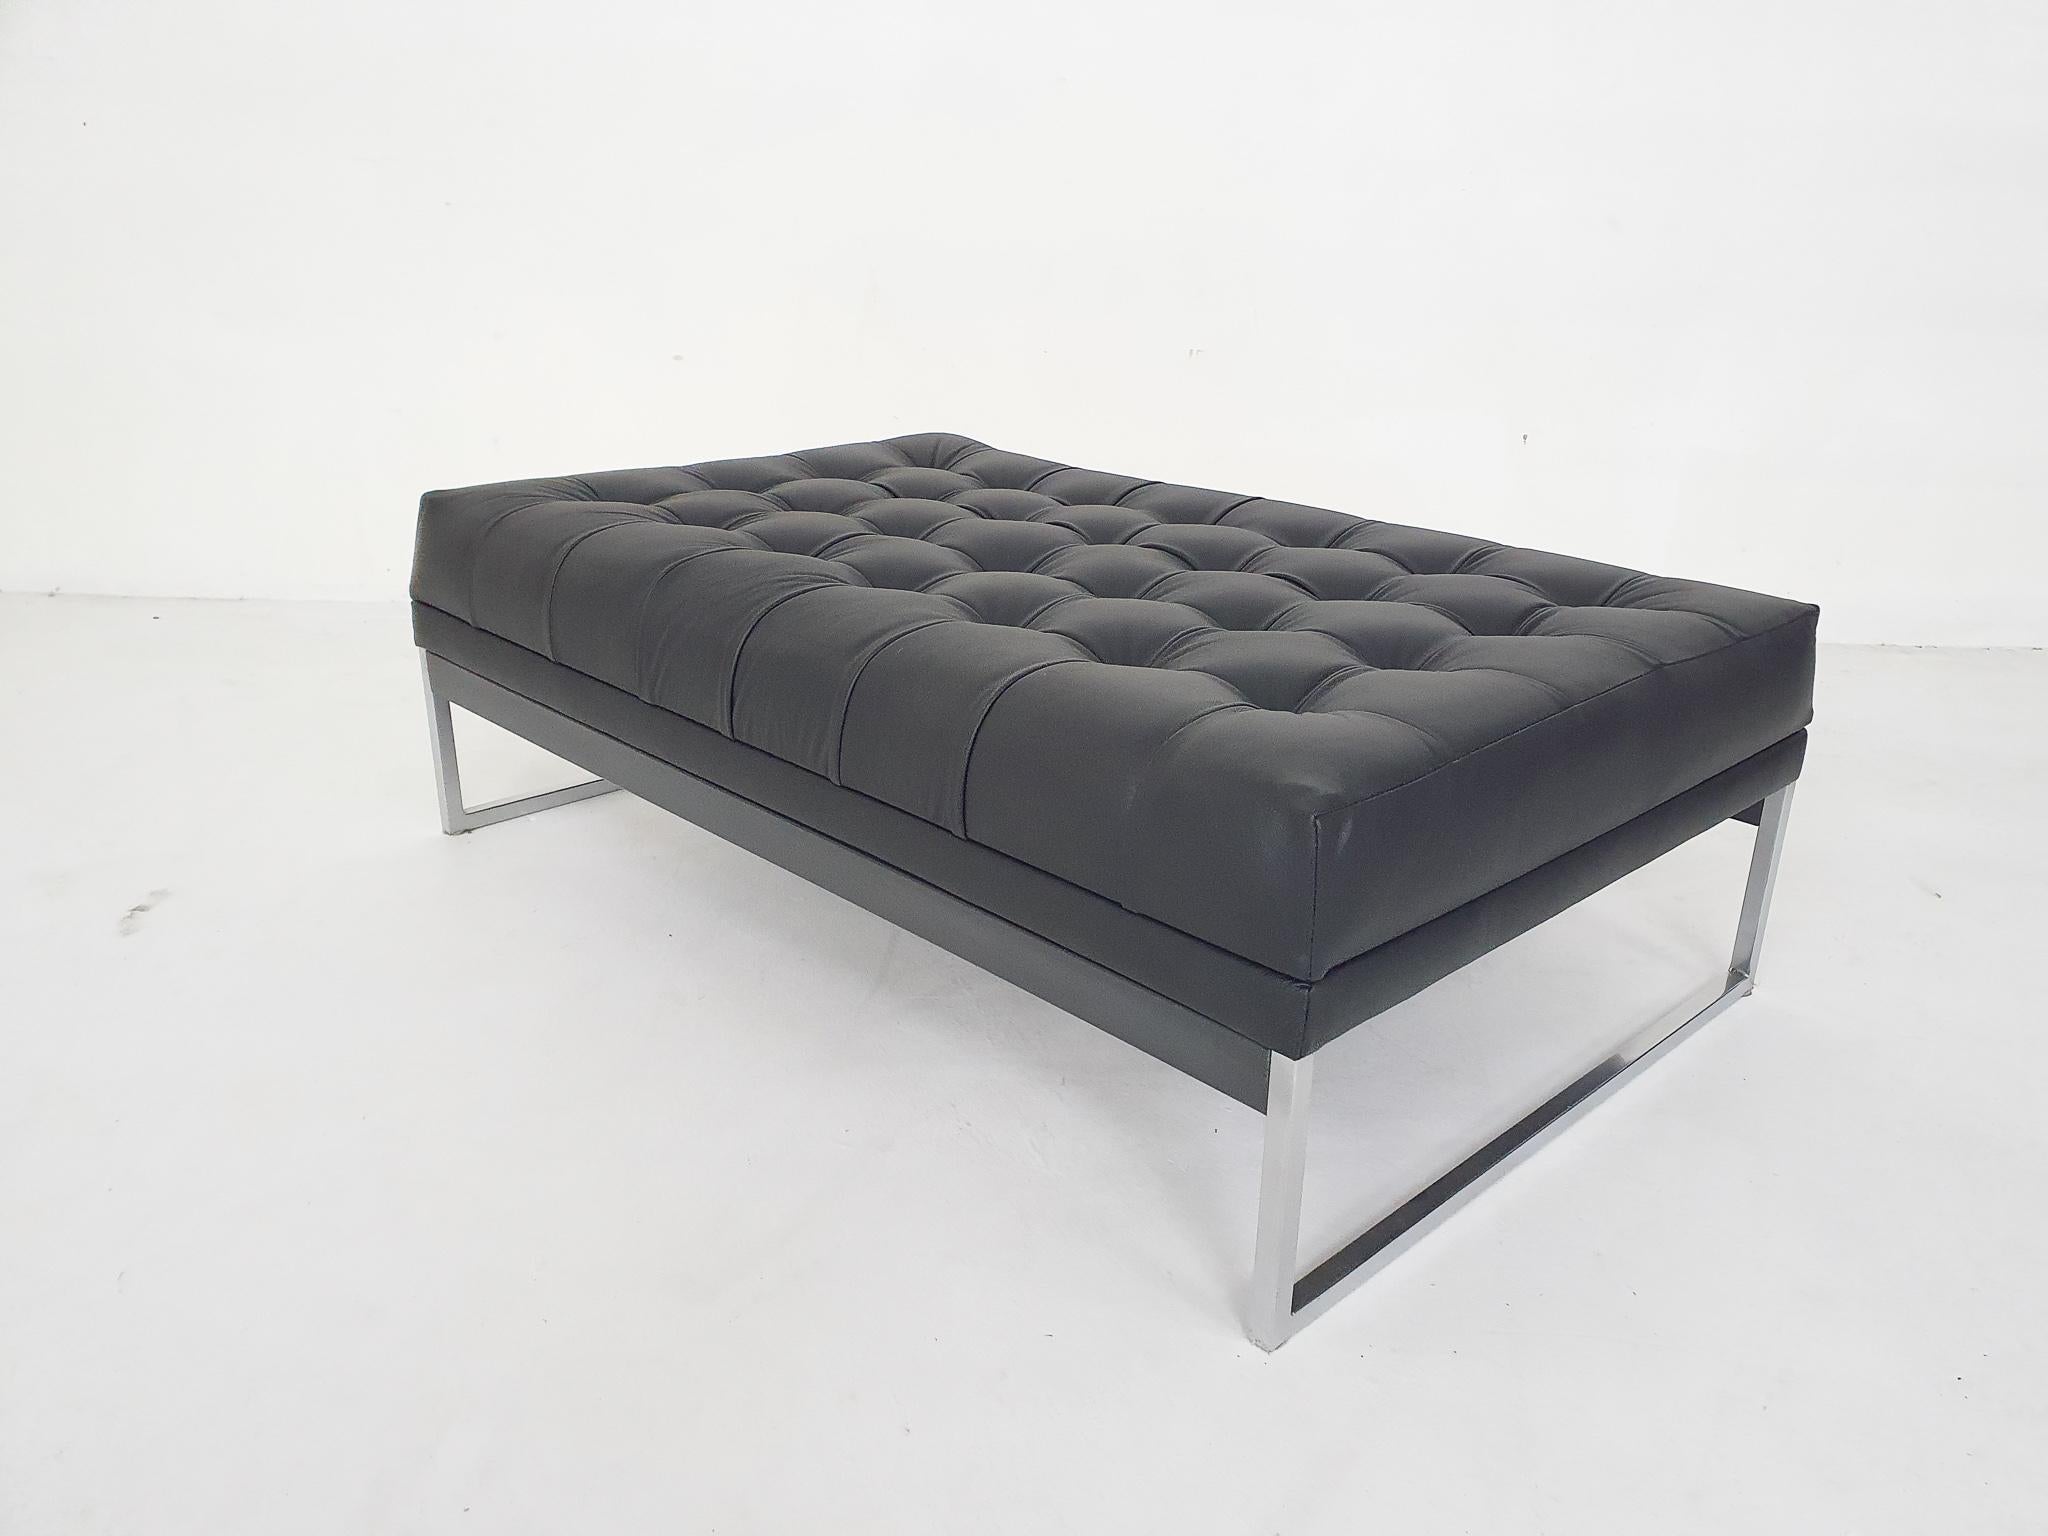 Metal bench or daybed with new black leather upholstery and new filling. Manufactured by AP originals.
We have two available, one is marked at the bottom.

